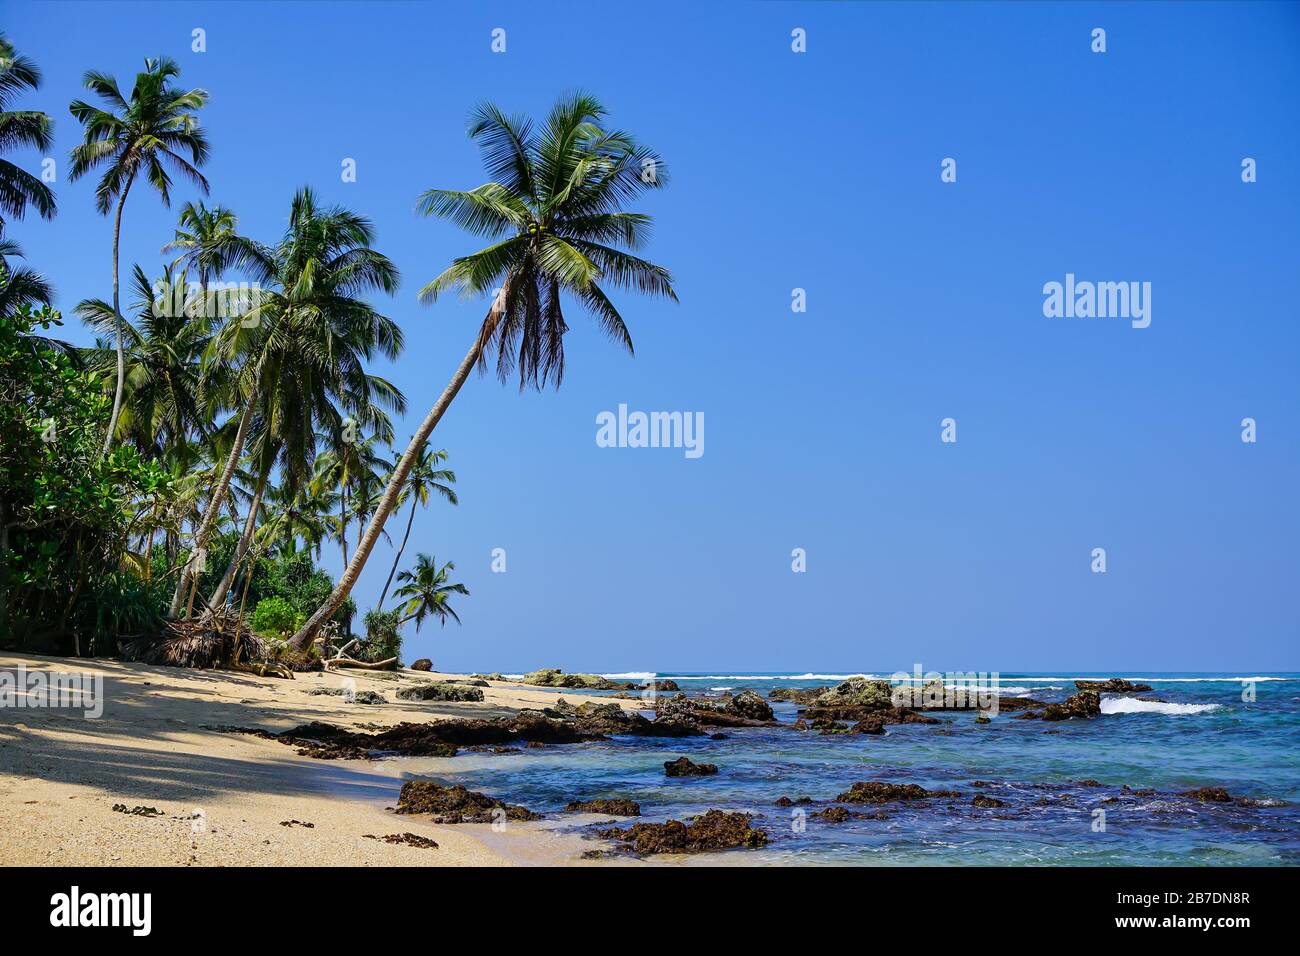 Scenic view of coconut palms and the Idian Ocean from the pristine sandy beach. The beaches of Sri Lanka (such as Hikkaduwa, Mirissa, Unawatuna) are b Stock Photo